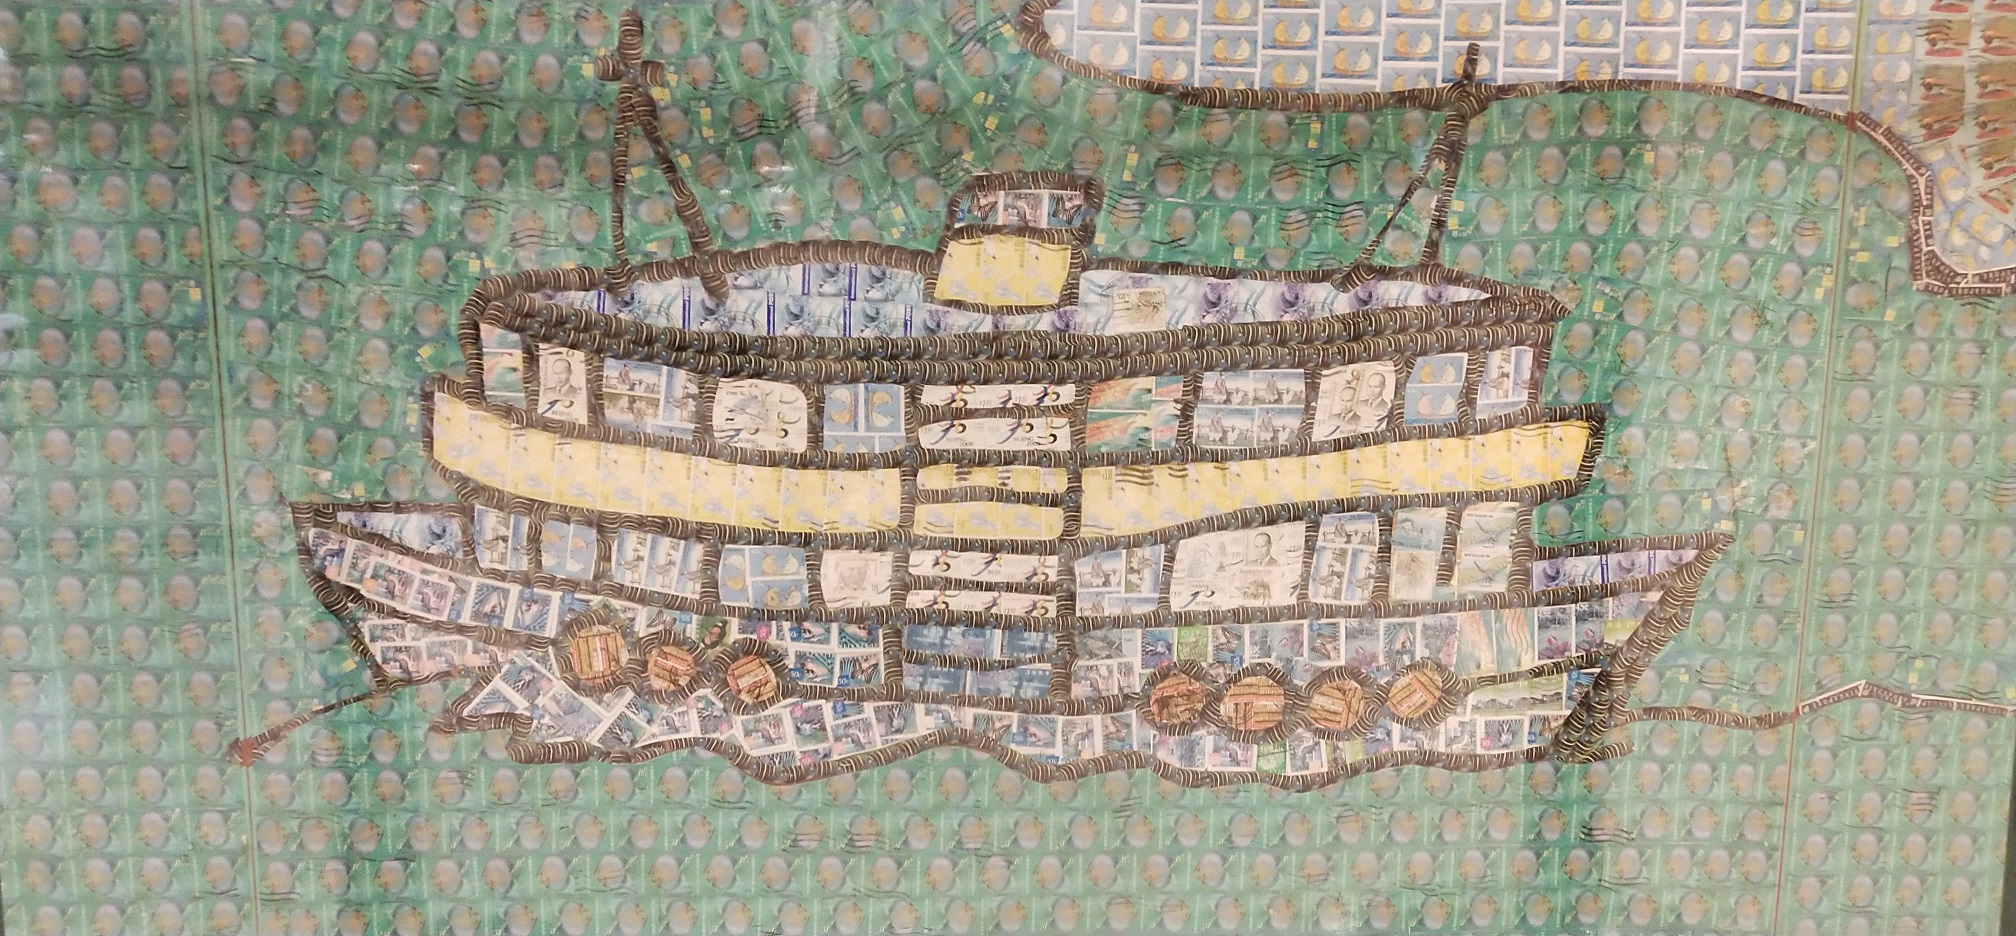 Star Ferry in the Mosaic by stamp